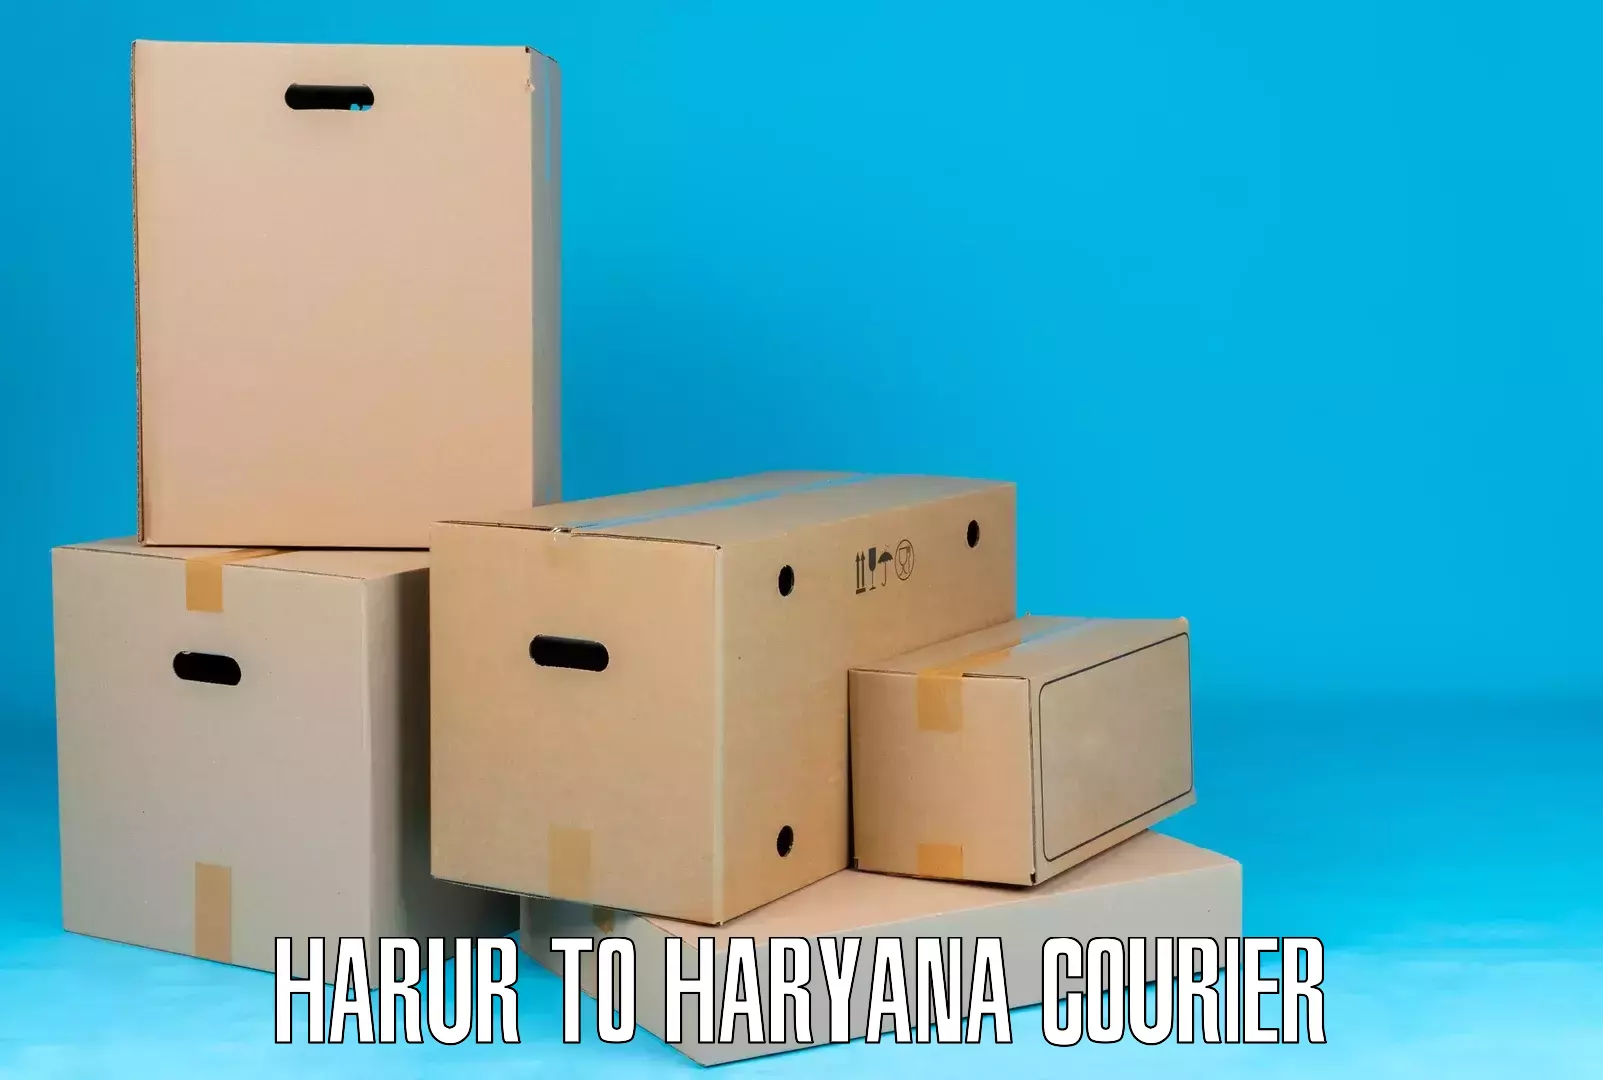 Nationwide courier service Harur to Haryana